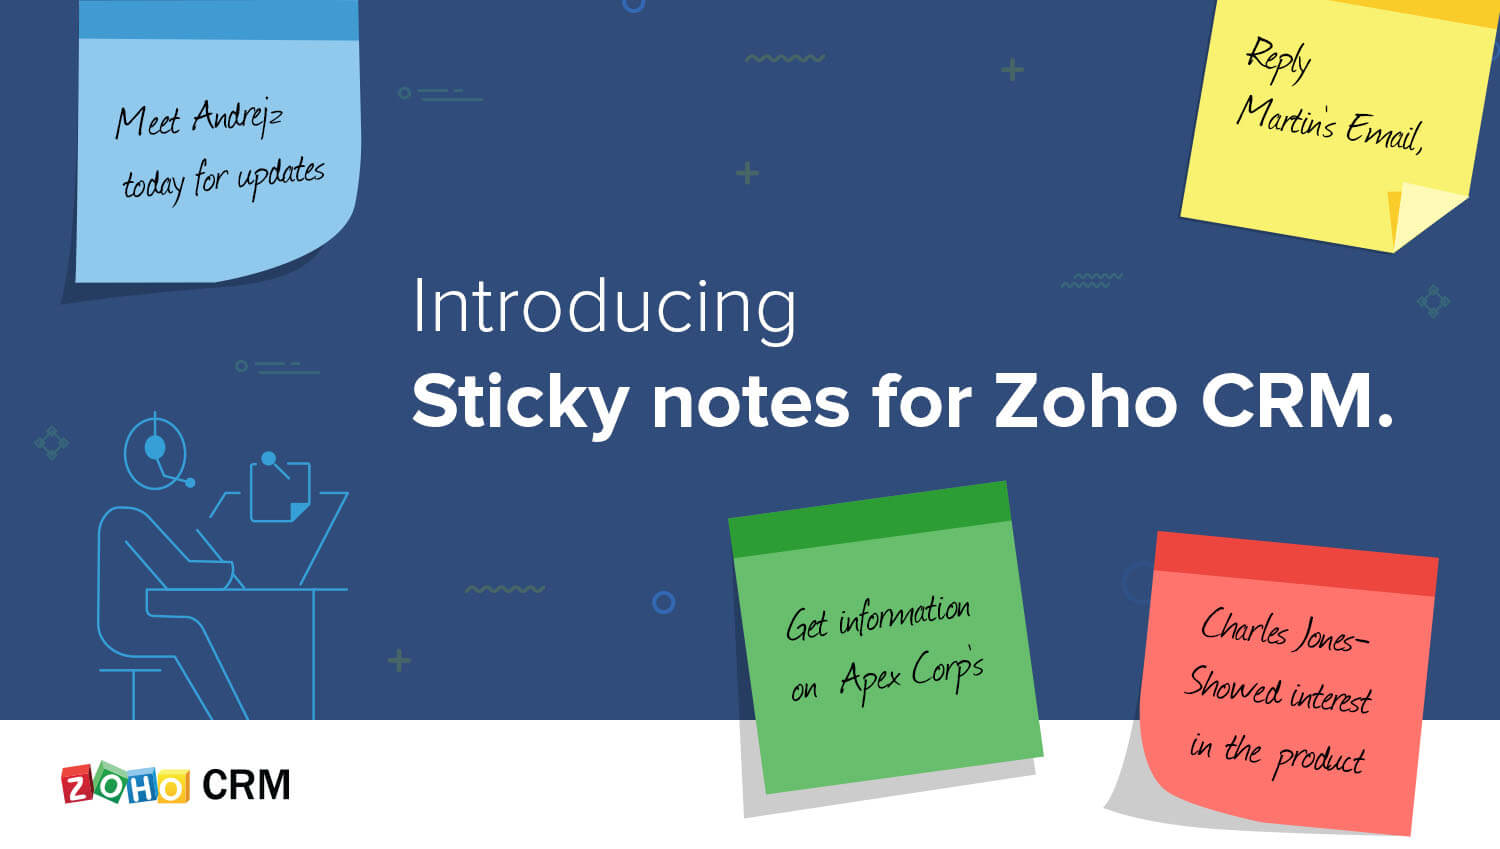 Introducing Zoho CRM’s sticky notes